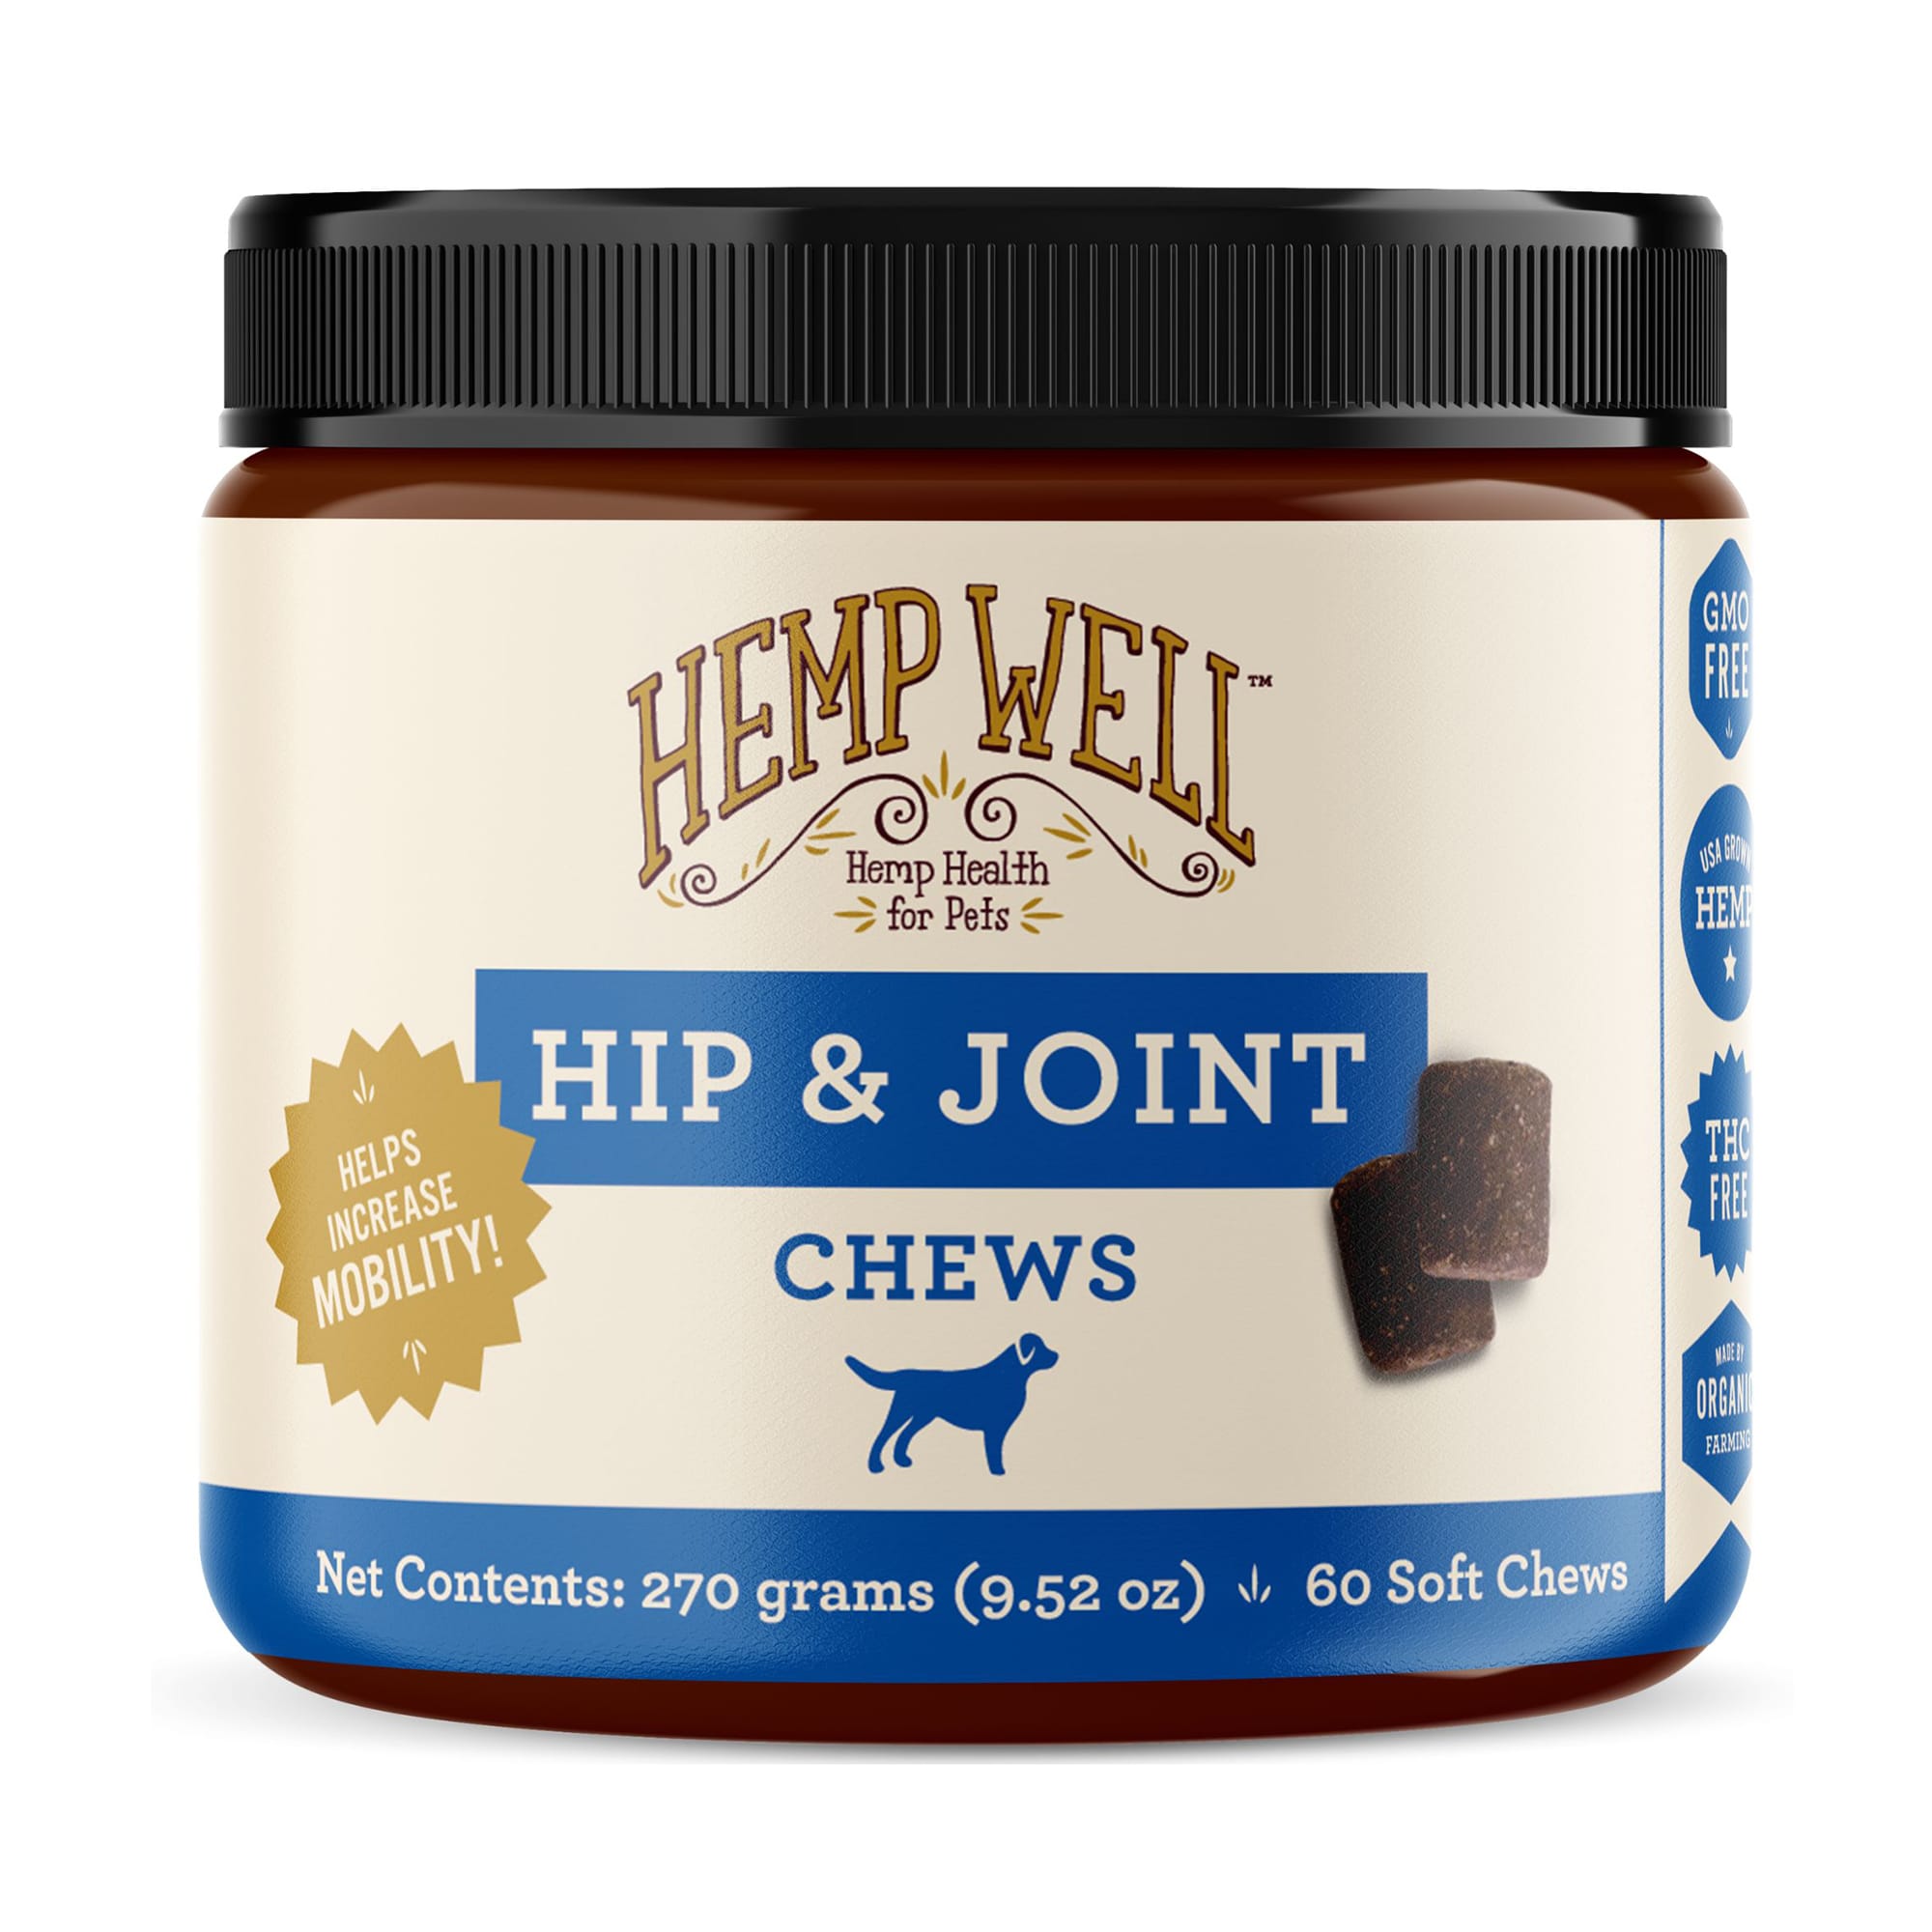 Hemp Well Hip & Joint Dog Soft Chews, 9.52 oz., Count of 60 | Petco